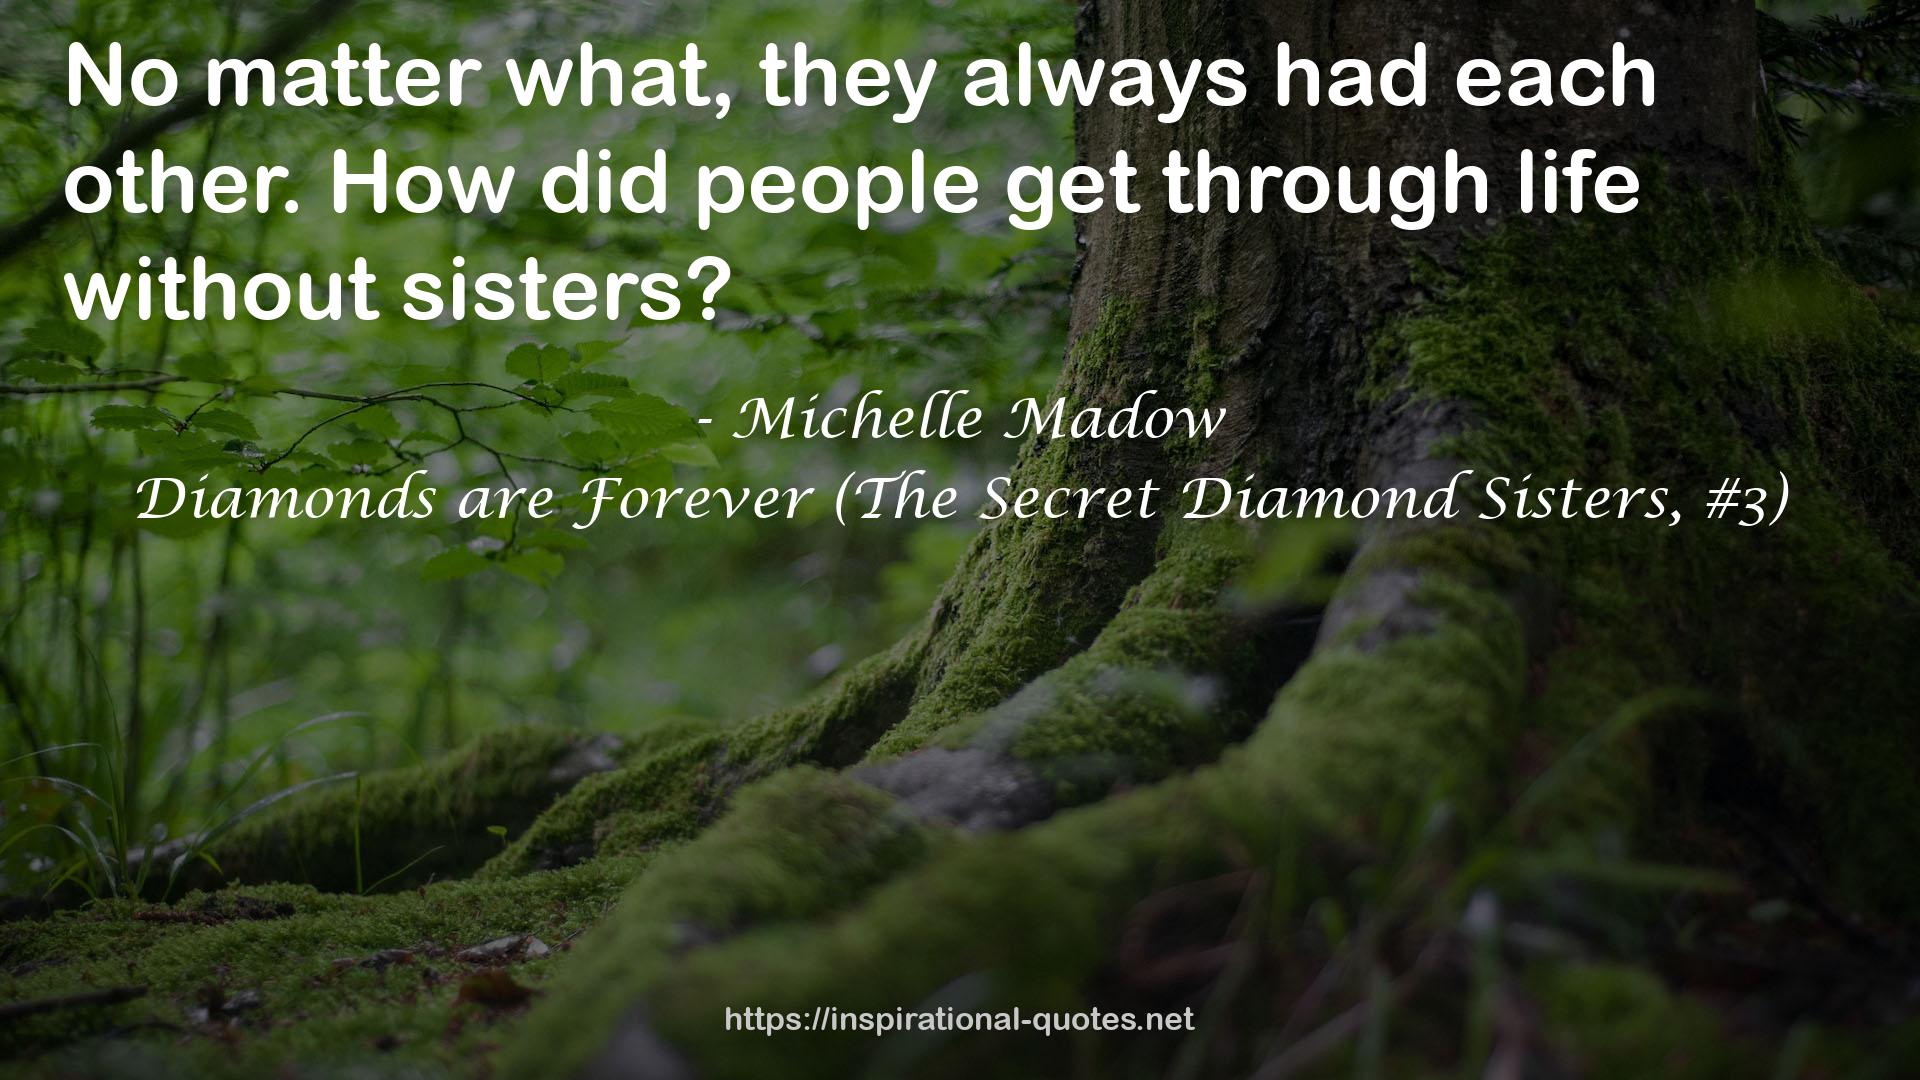 Diamonds are Forever (The Secret Diamond Sisters, #3) QUOTES